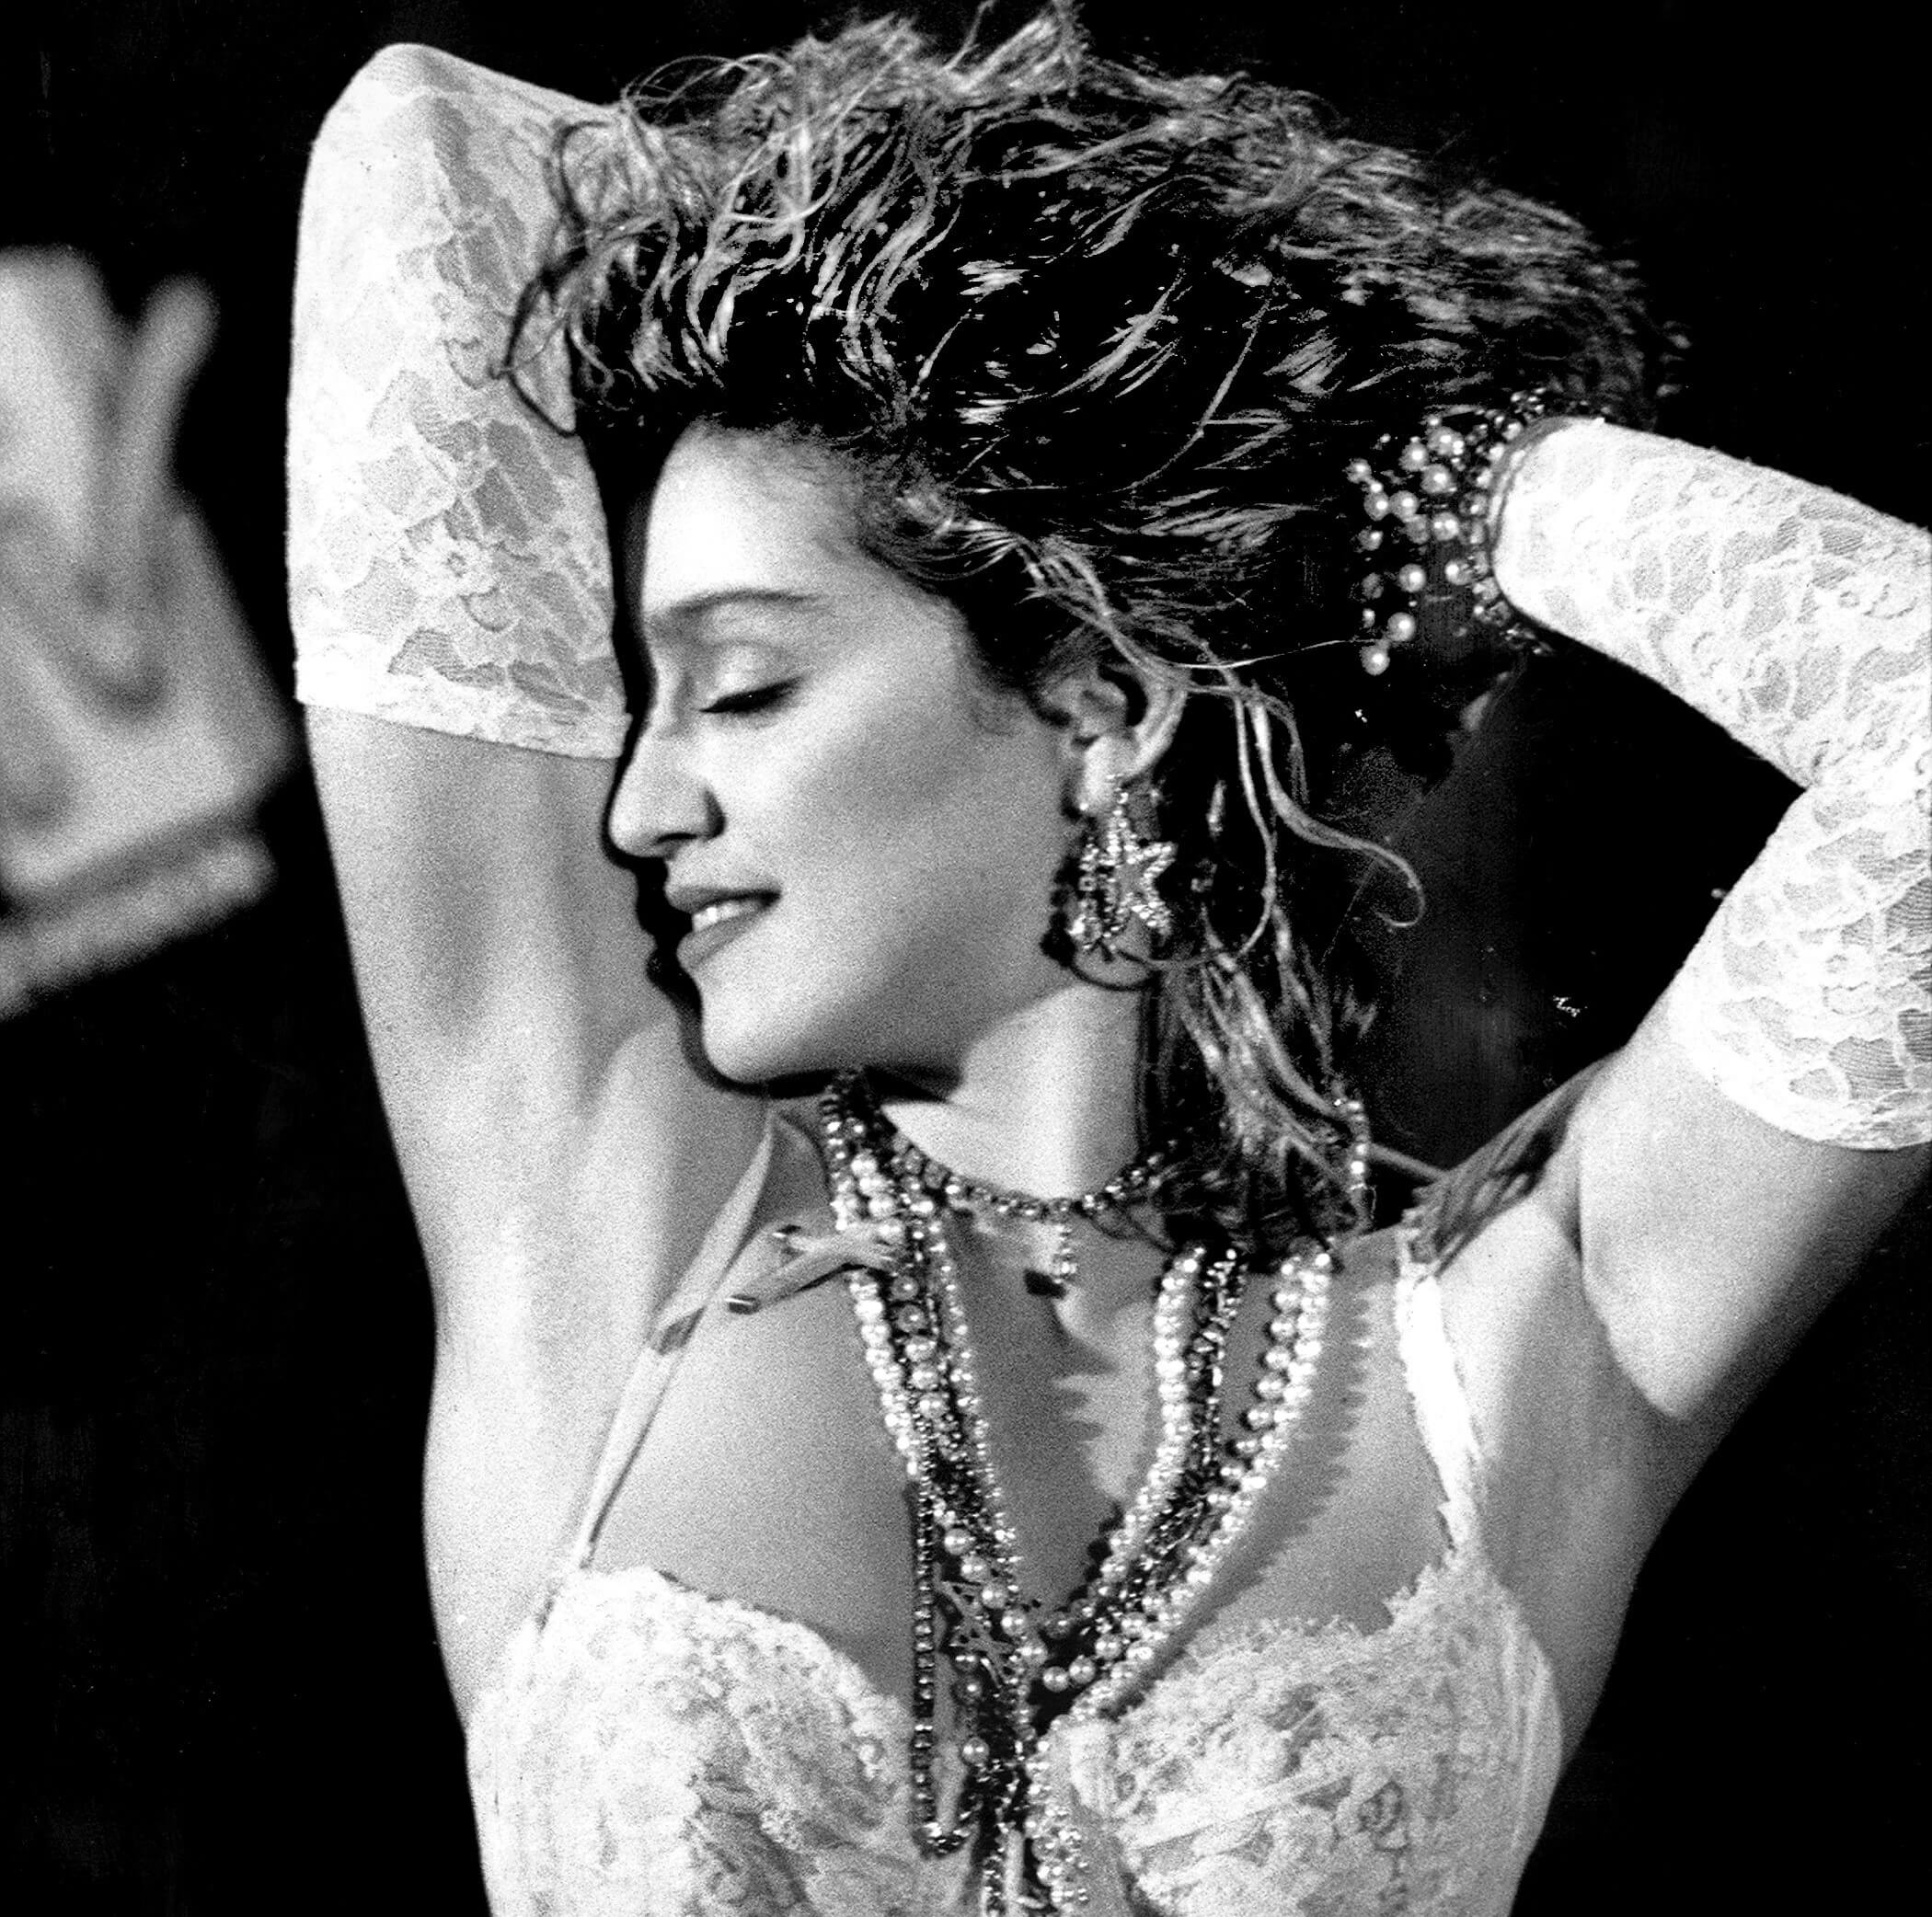 A Classic Rock Song Stopped Madonna's 'Material Girl' From Hitting